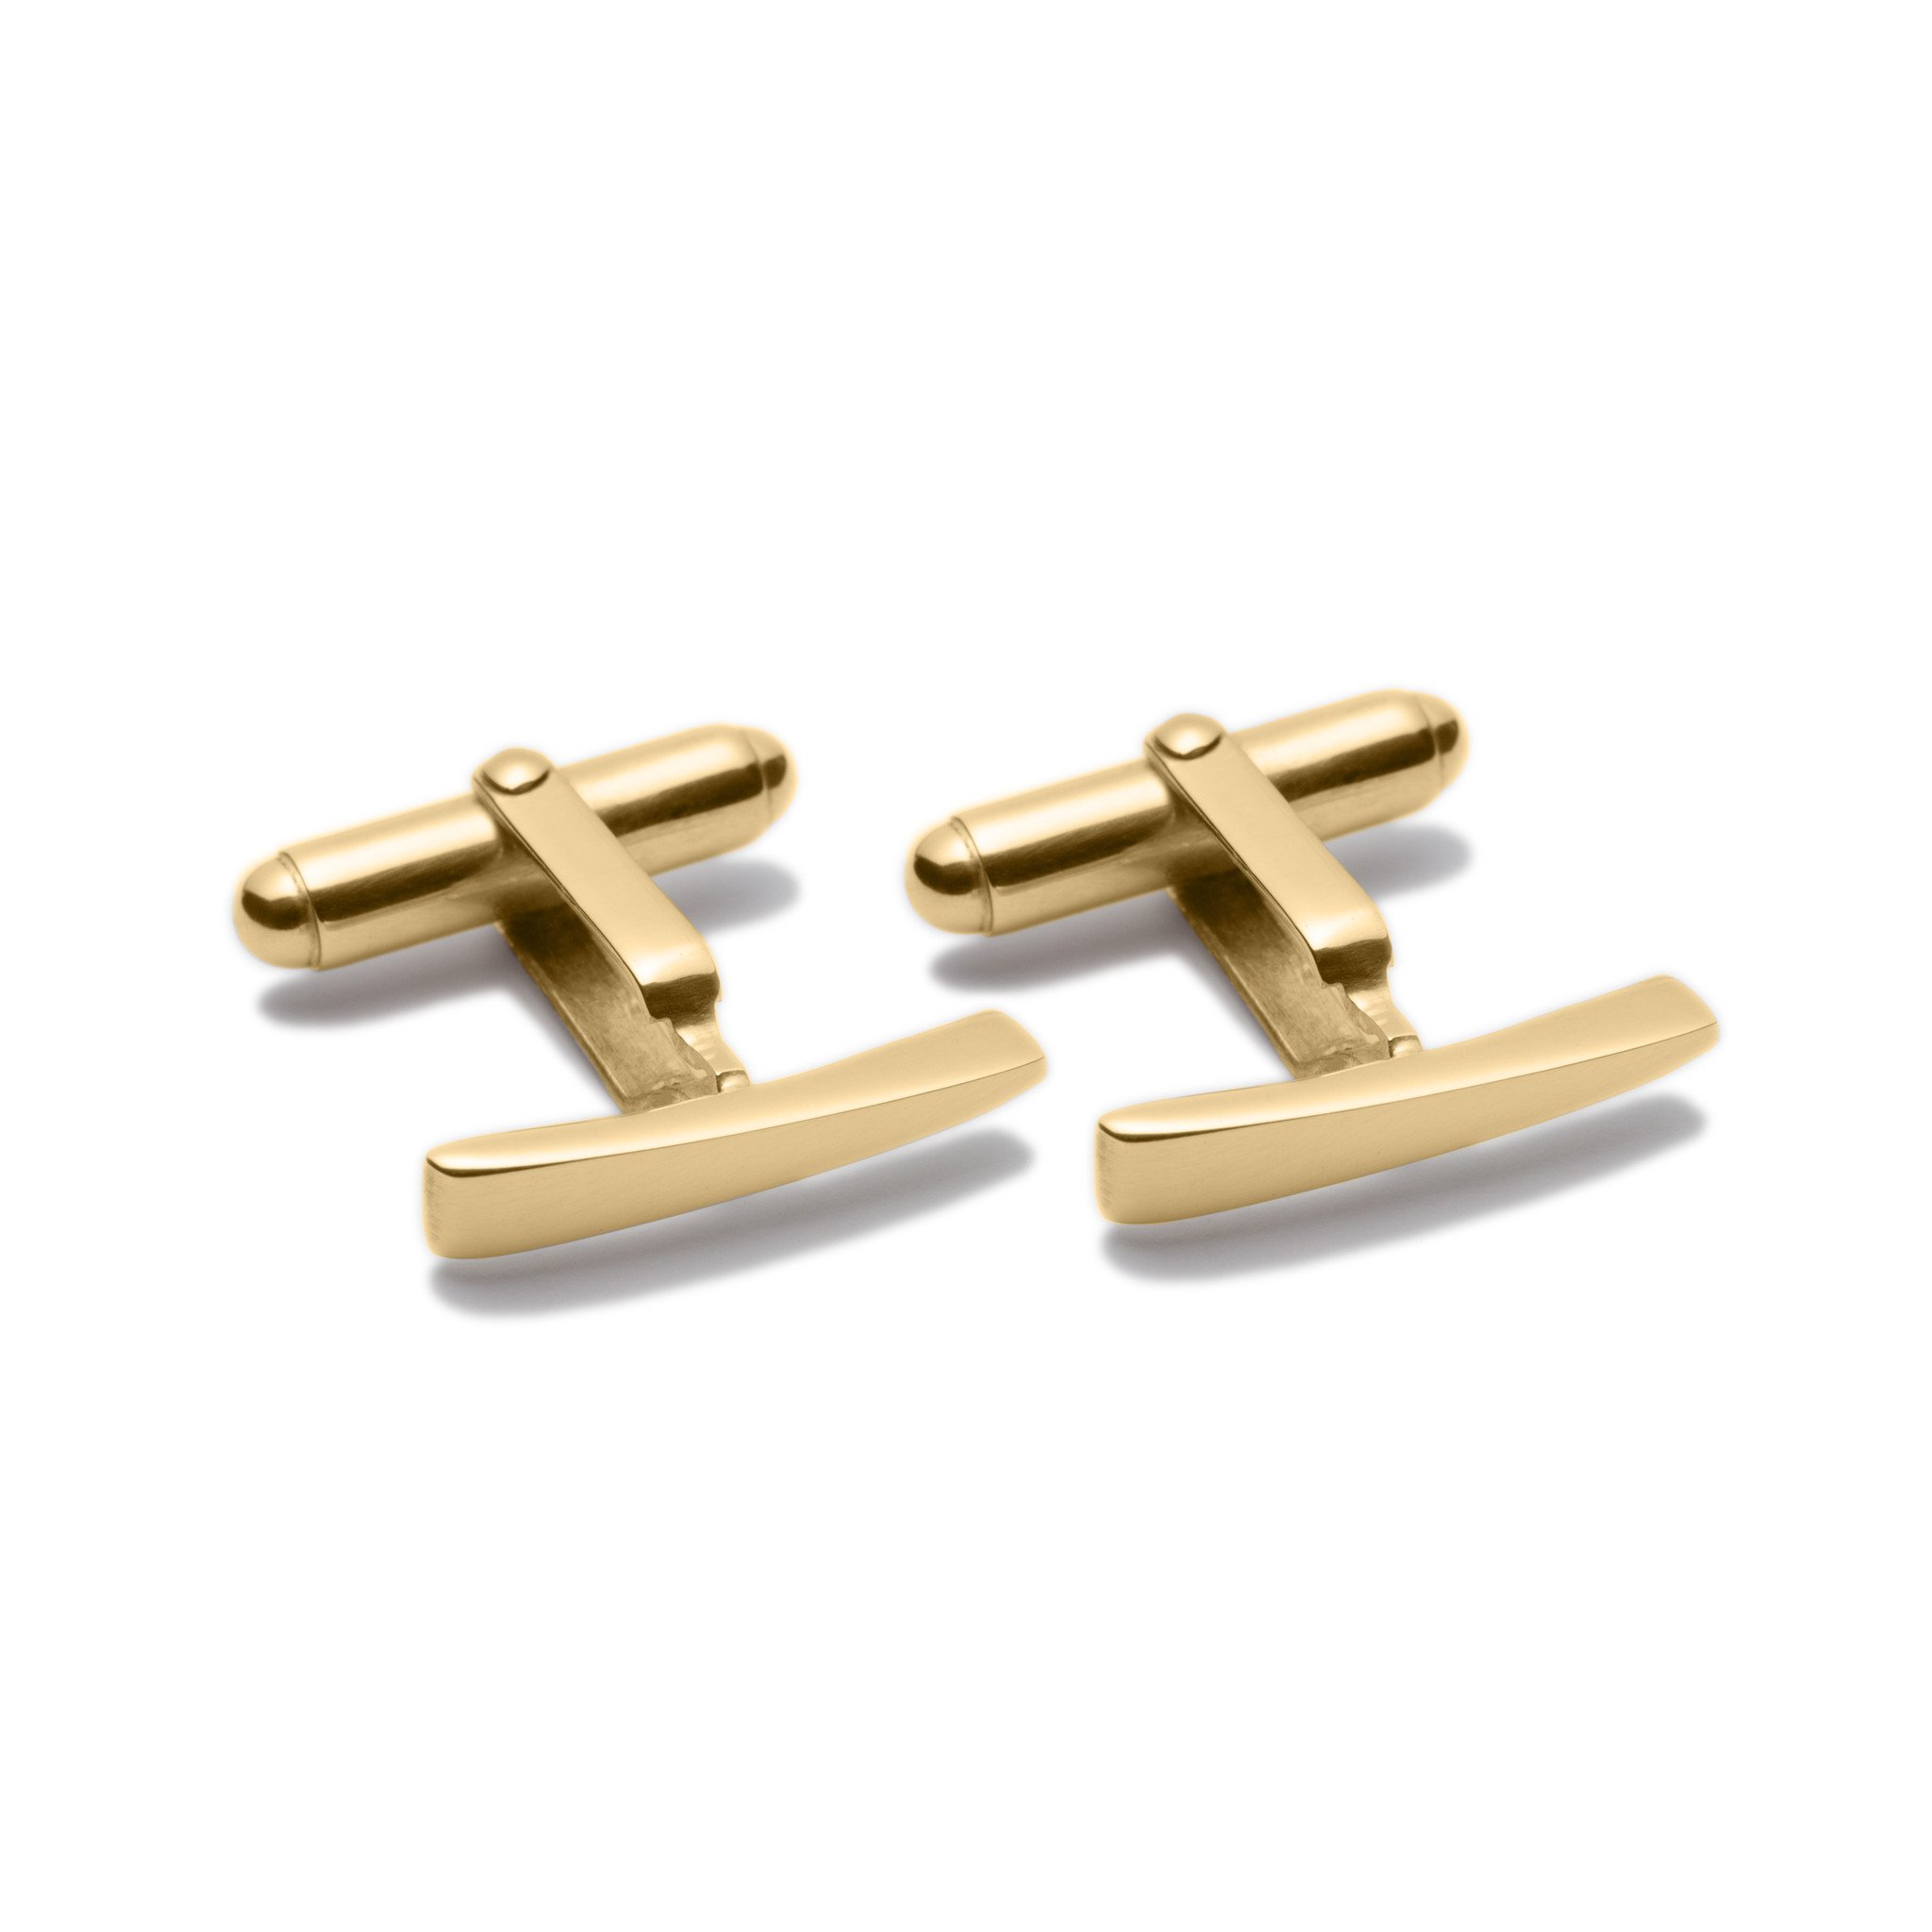 Circle of Dreams Gold Bar Cuff-links.Unique designer jewellery handcrafted in Ireland.